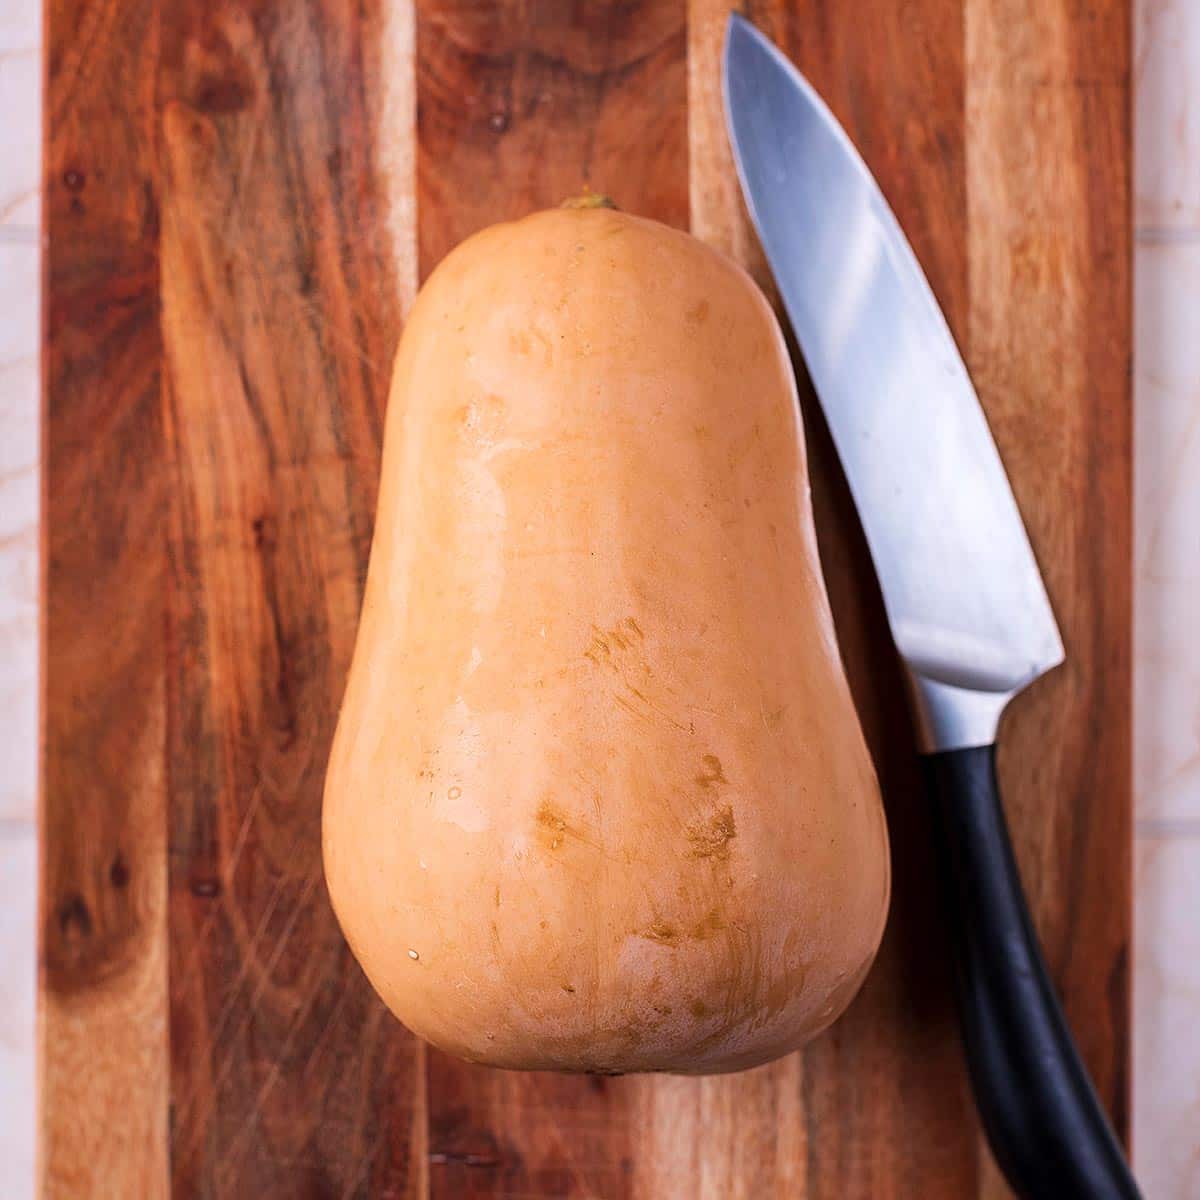 A whole butternut squash and a chef's knife on a wooden chopping board.